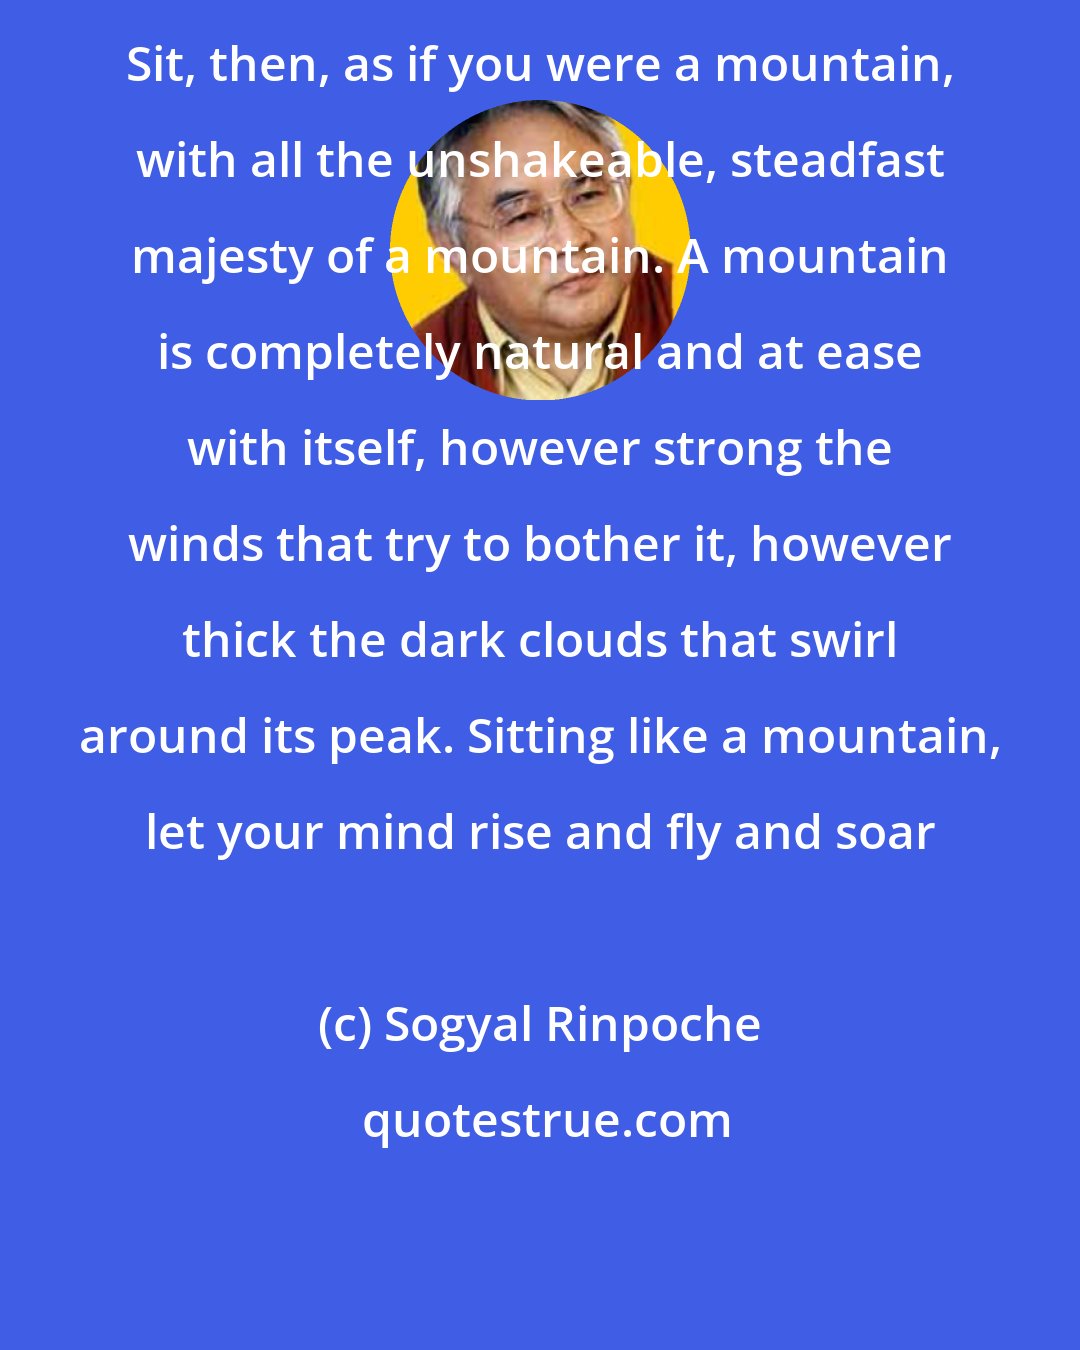 Sogyal Rinpoche: Sit, then, as if you were a mountain, with all the unshakeable, steadfast majesty of a mountain. A mountain is completely natural and at ease with itself, however strong the winds that try to bother it, however thick the dark clouds that swirl around its peak. Sitting like a mountain, let your mind rise and fly and soar